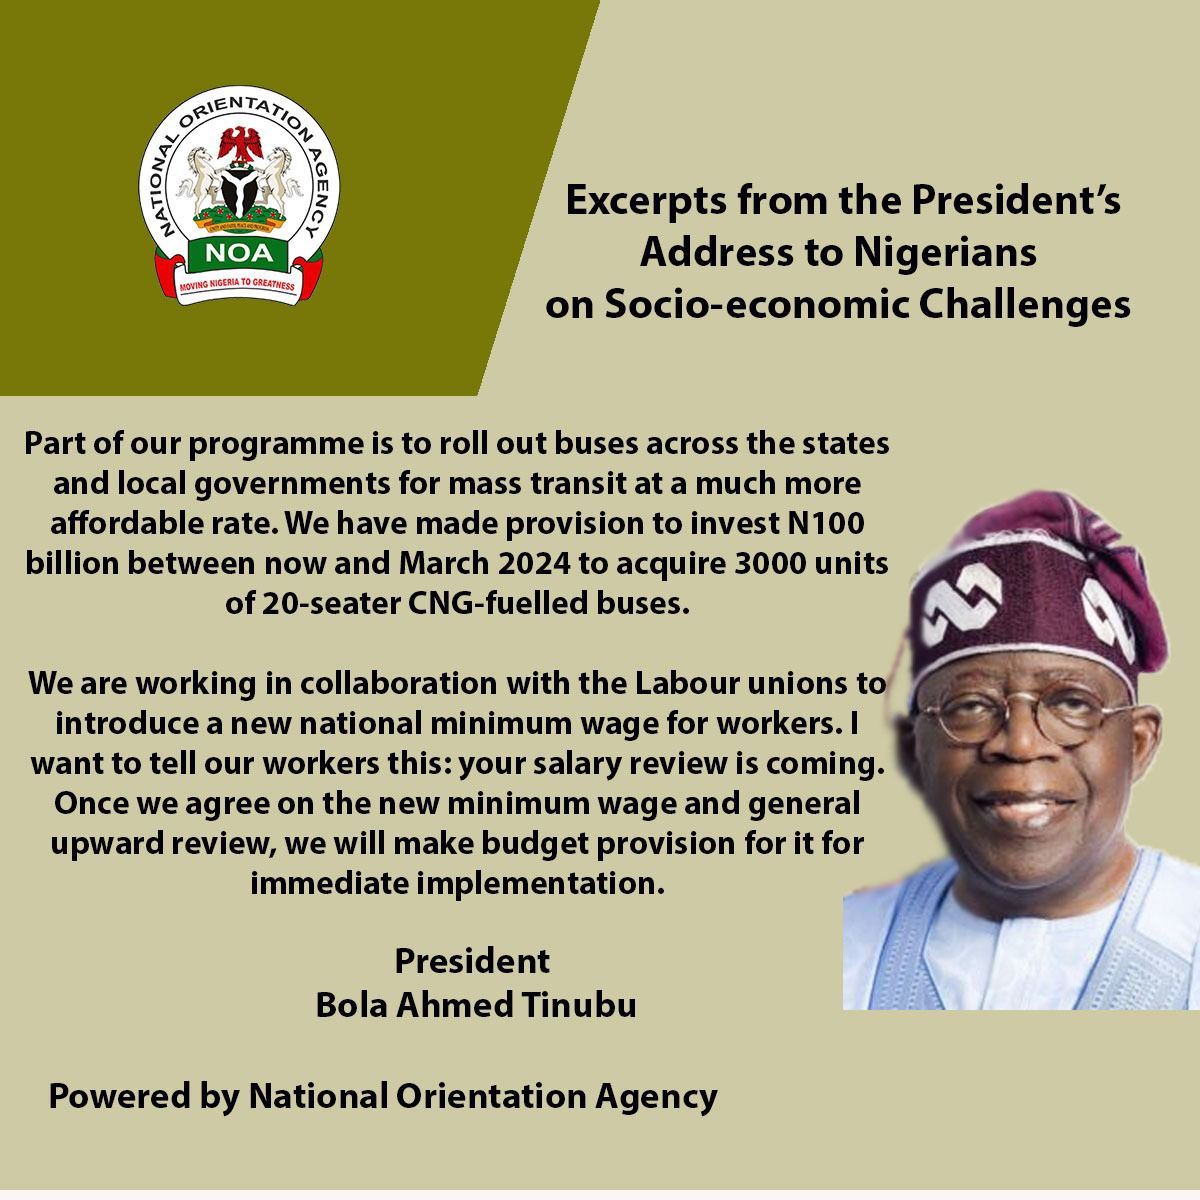 Fellow Nigerians, I made a solemn pledge to work for you. To improve your welfare and living conditions is of paramount importance to me and it's the only thing that keeps me up day and night. President Bola Ahmed Tinubu @officialABAT
#RenewedHope 
#Letthepoorbreathe